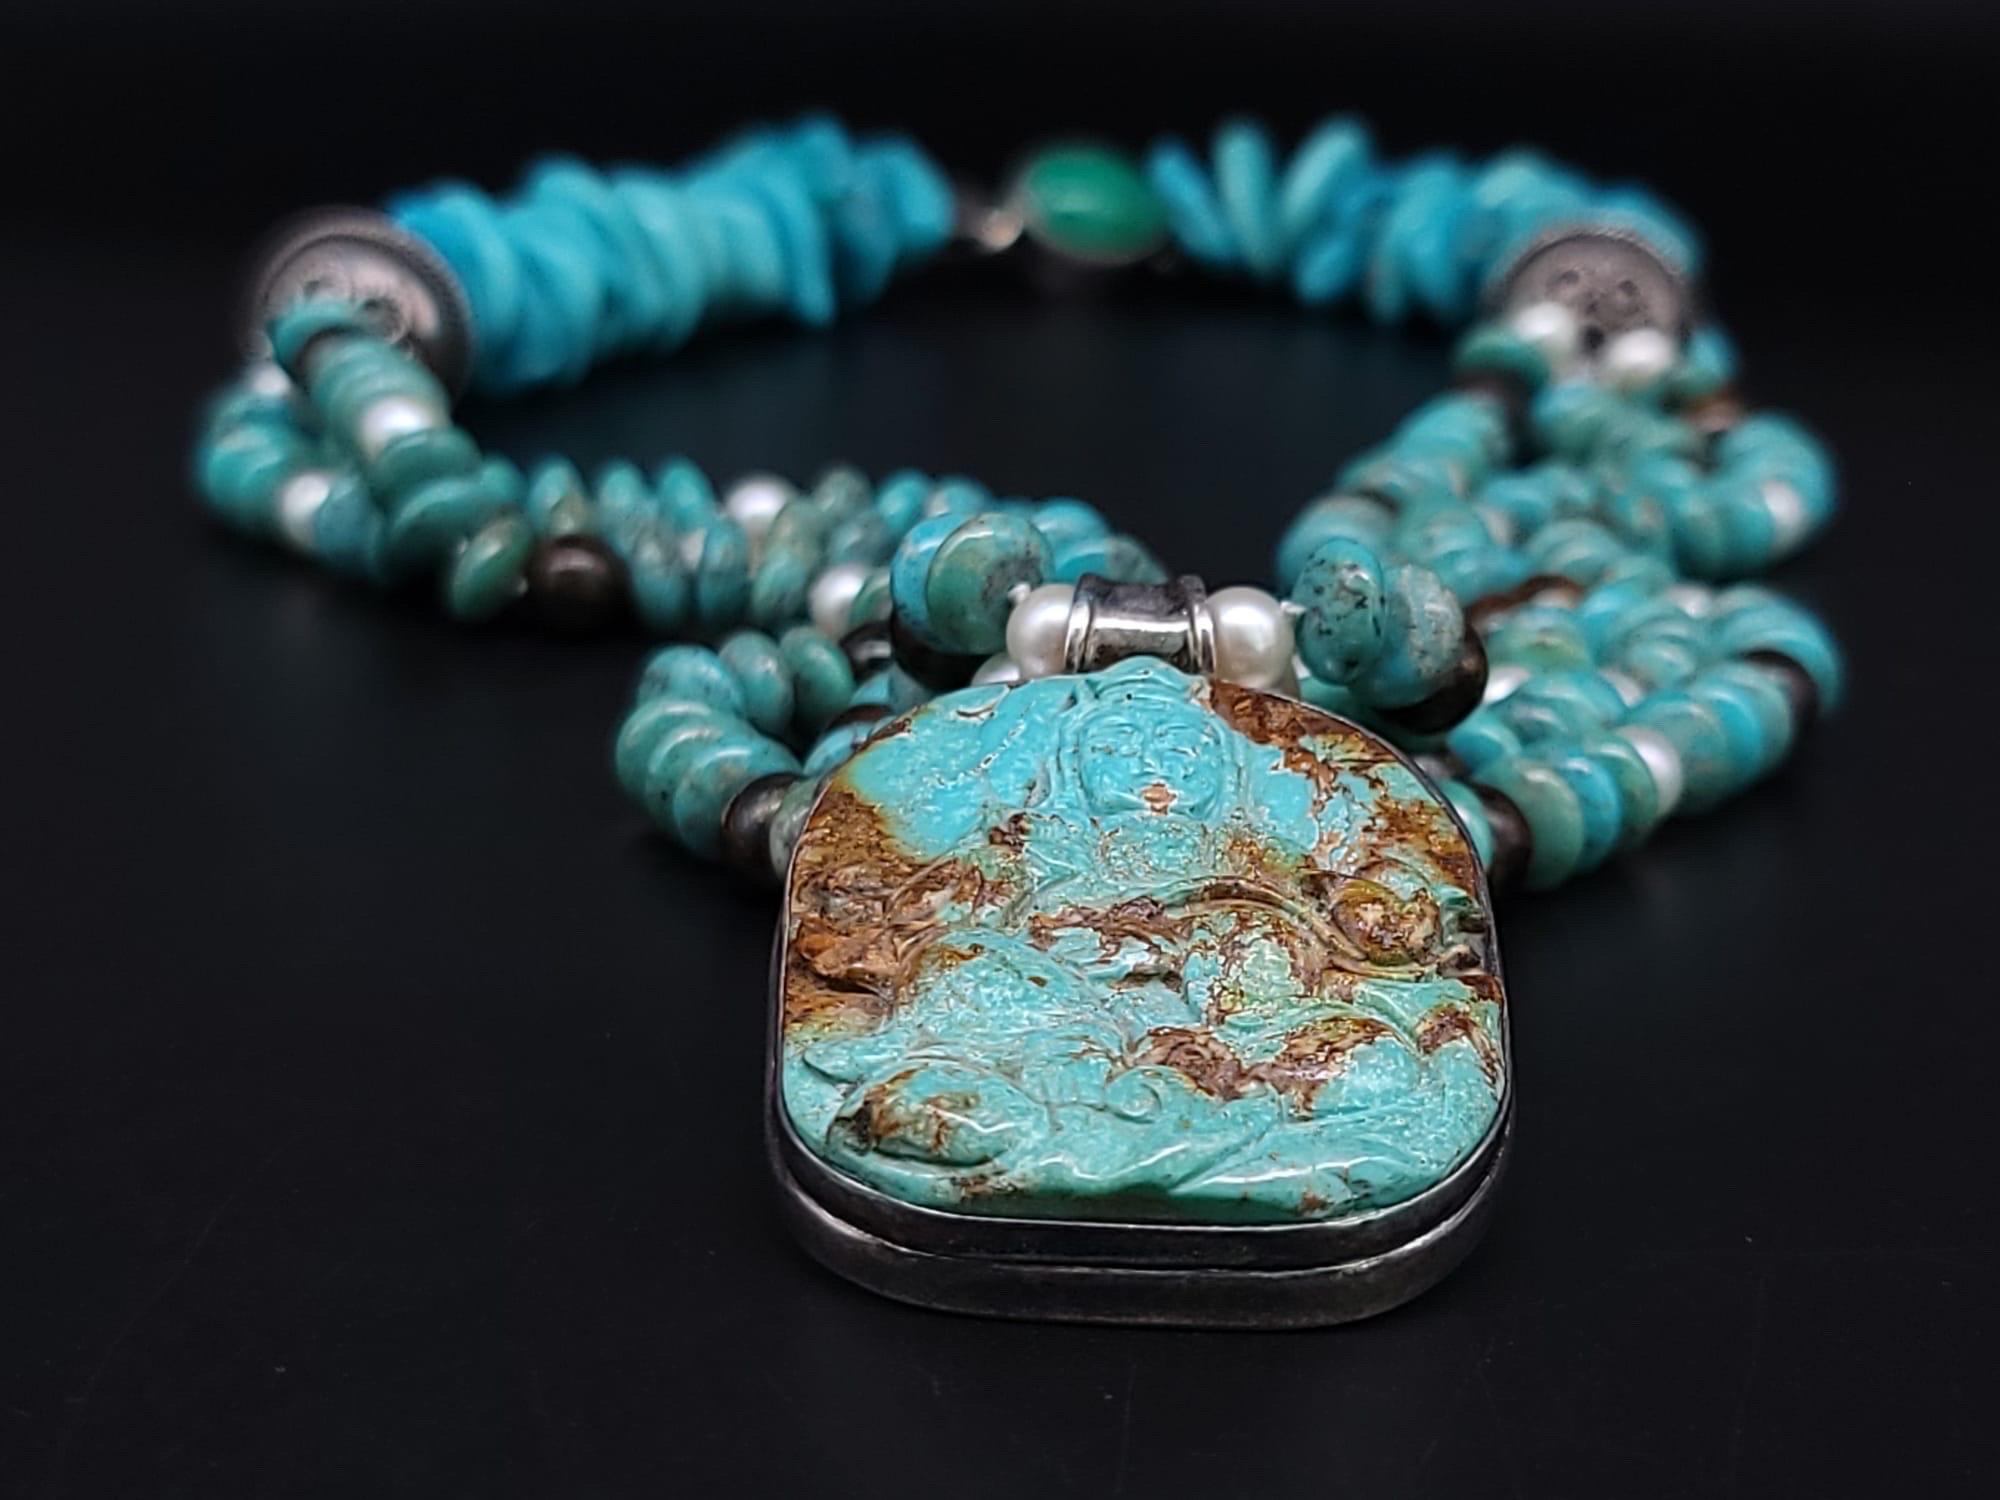 Mixed Cut A.Jeschel Australian Opal and Turquoise necklace with a Buddha carved pendant. For Sale